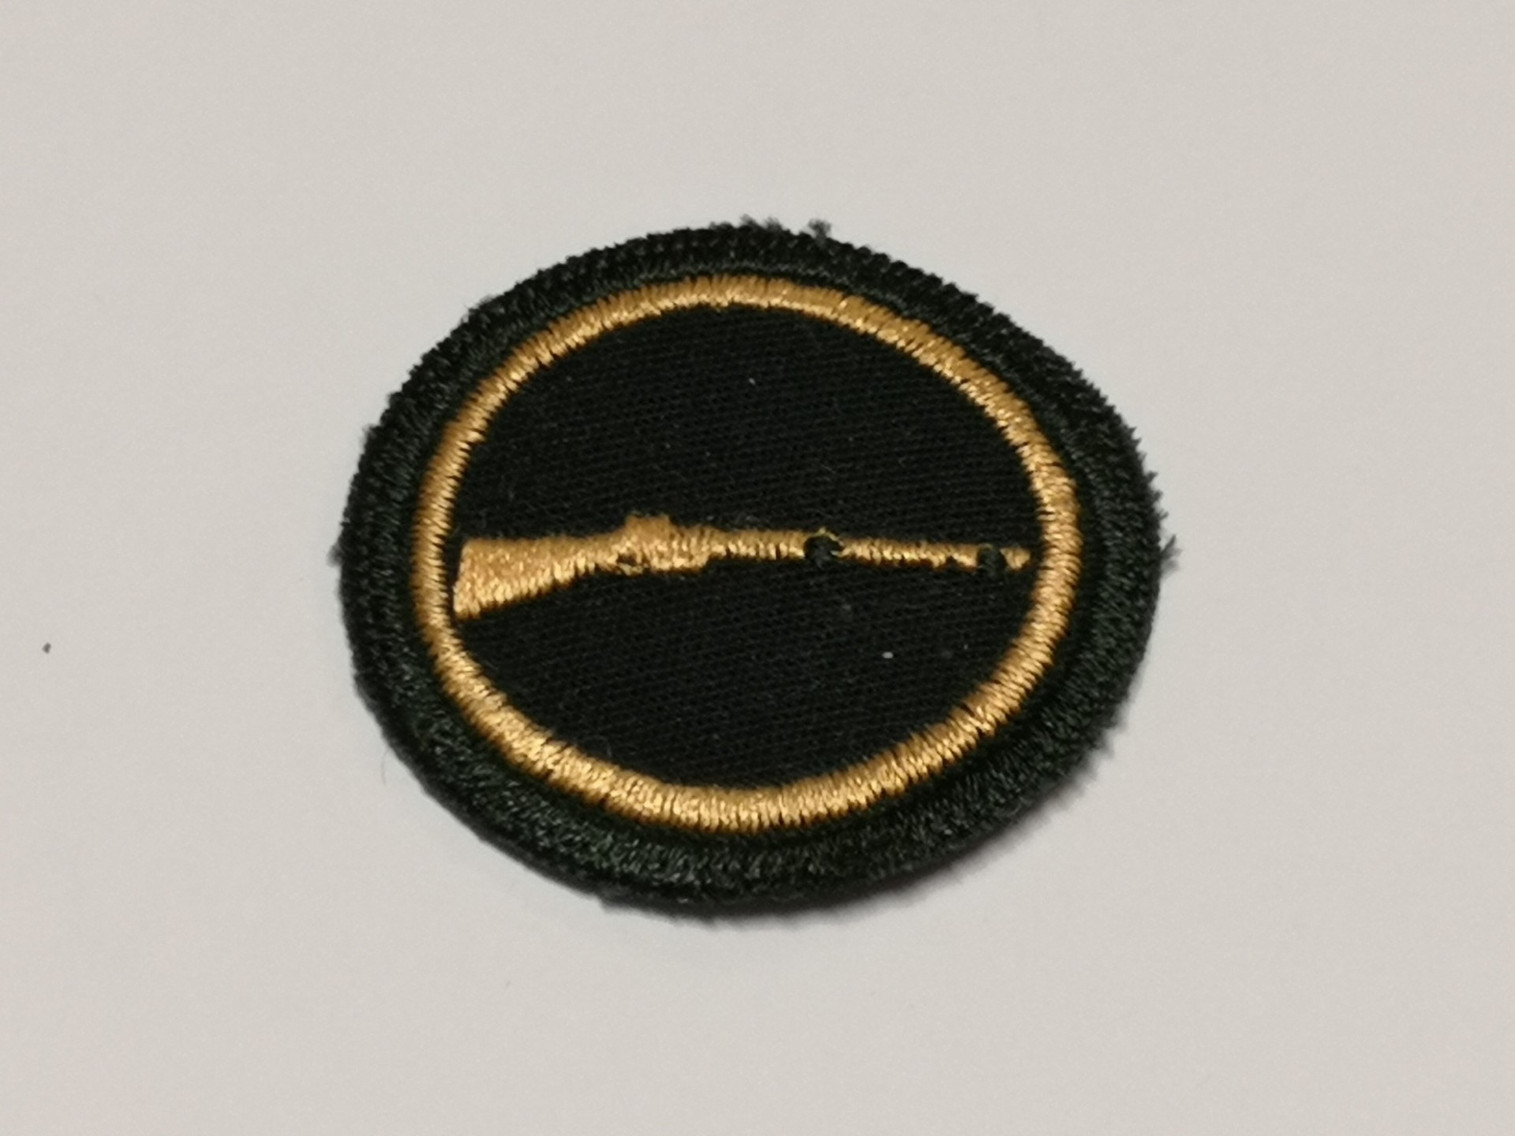 Canadian Army Cadets Rifle Coach Badge